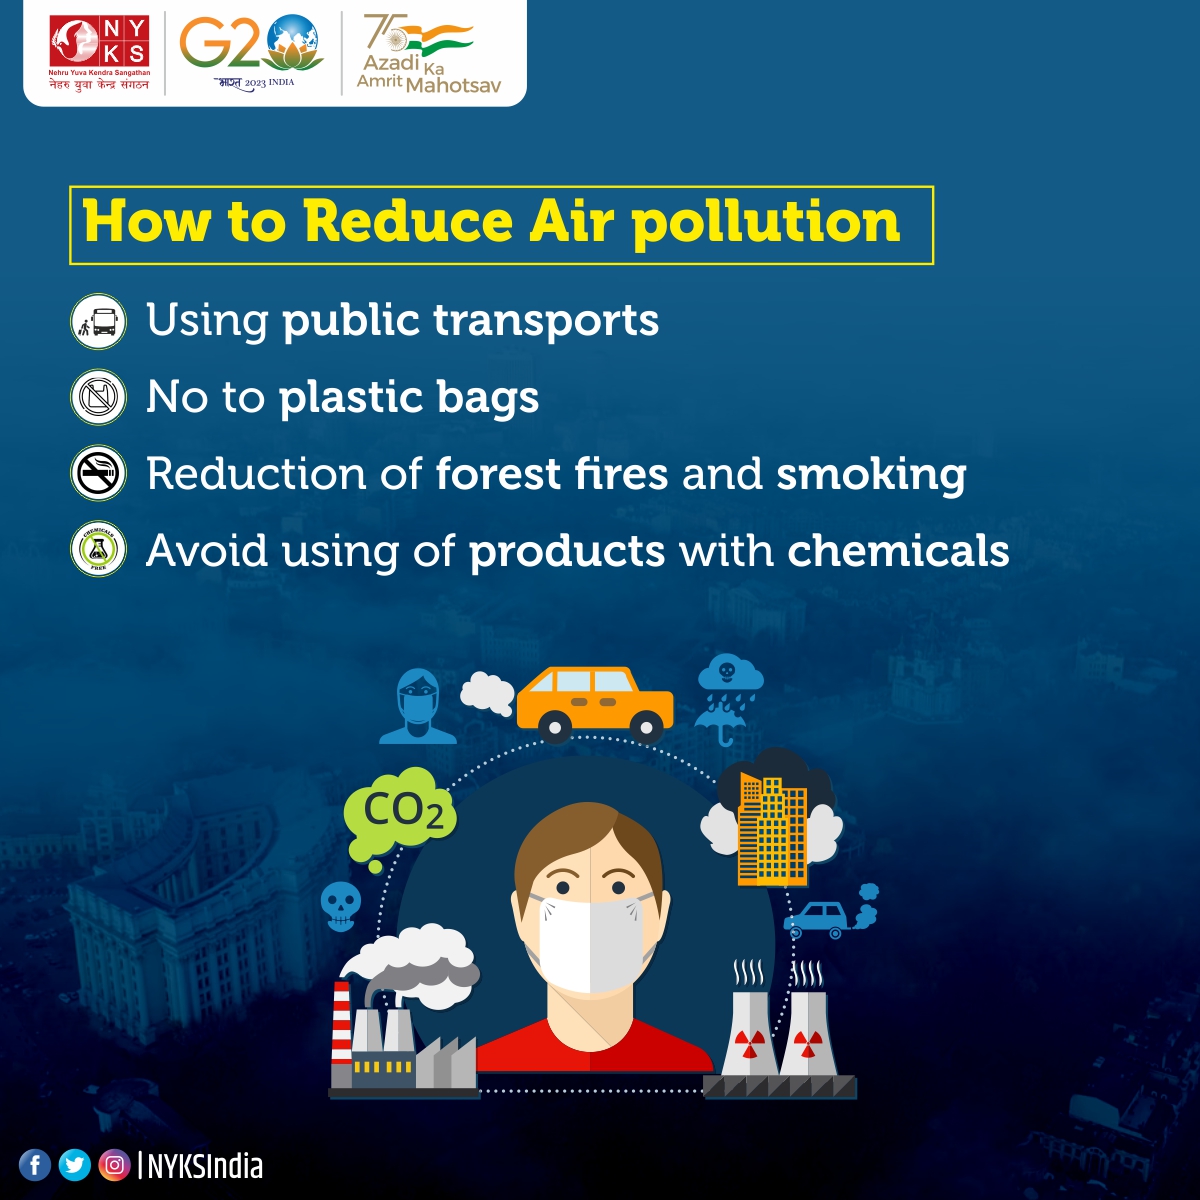 Be responsible and avoid air pollution. 

#EarthDay #NoPollution #Youth #India #airpollution